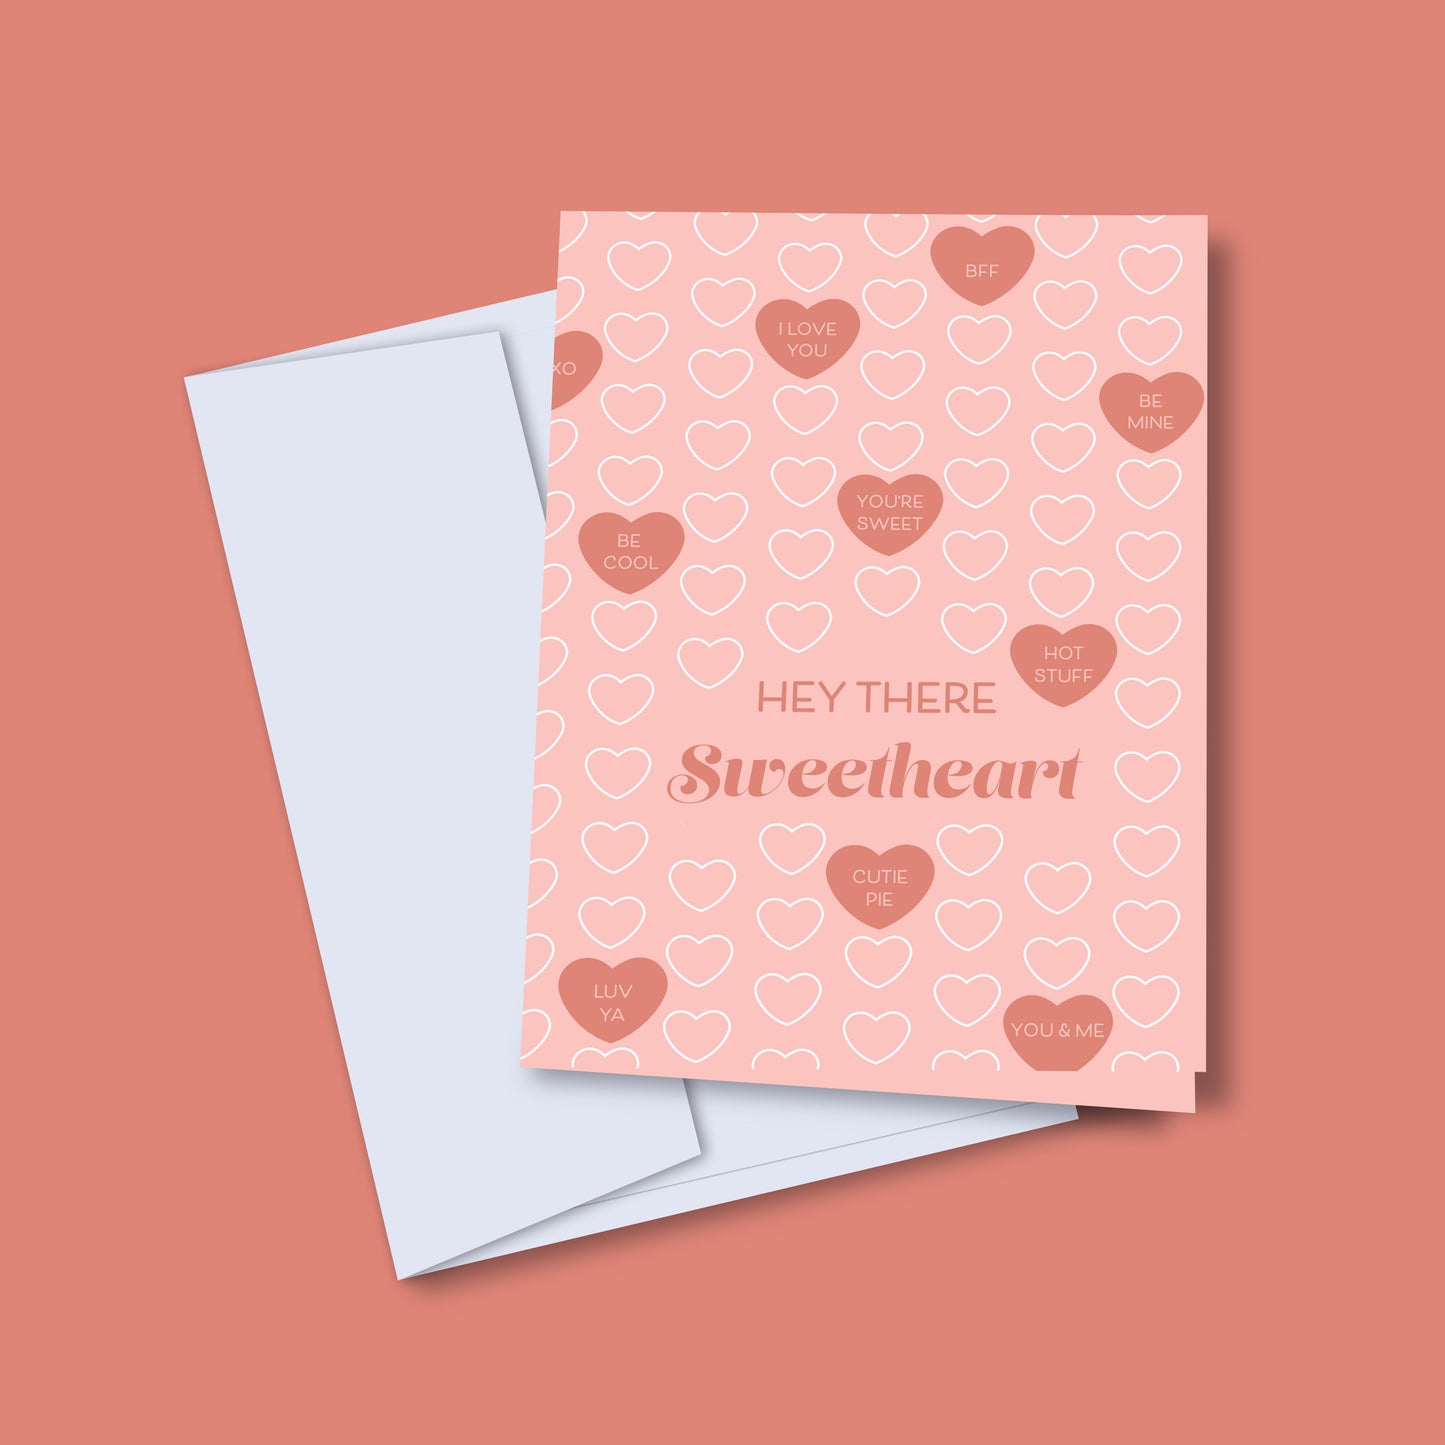 Hey There Sweetheart Card